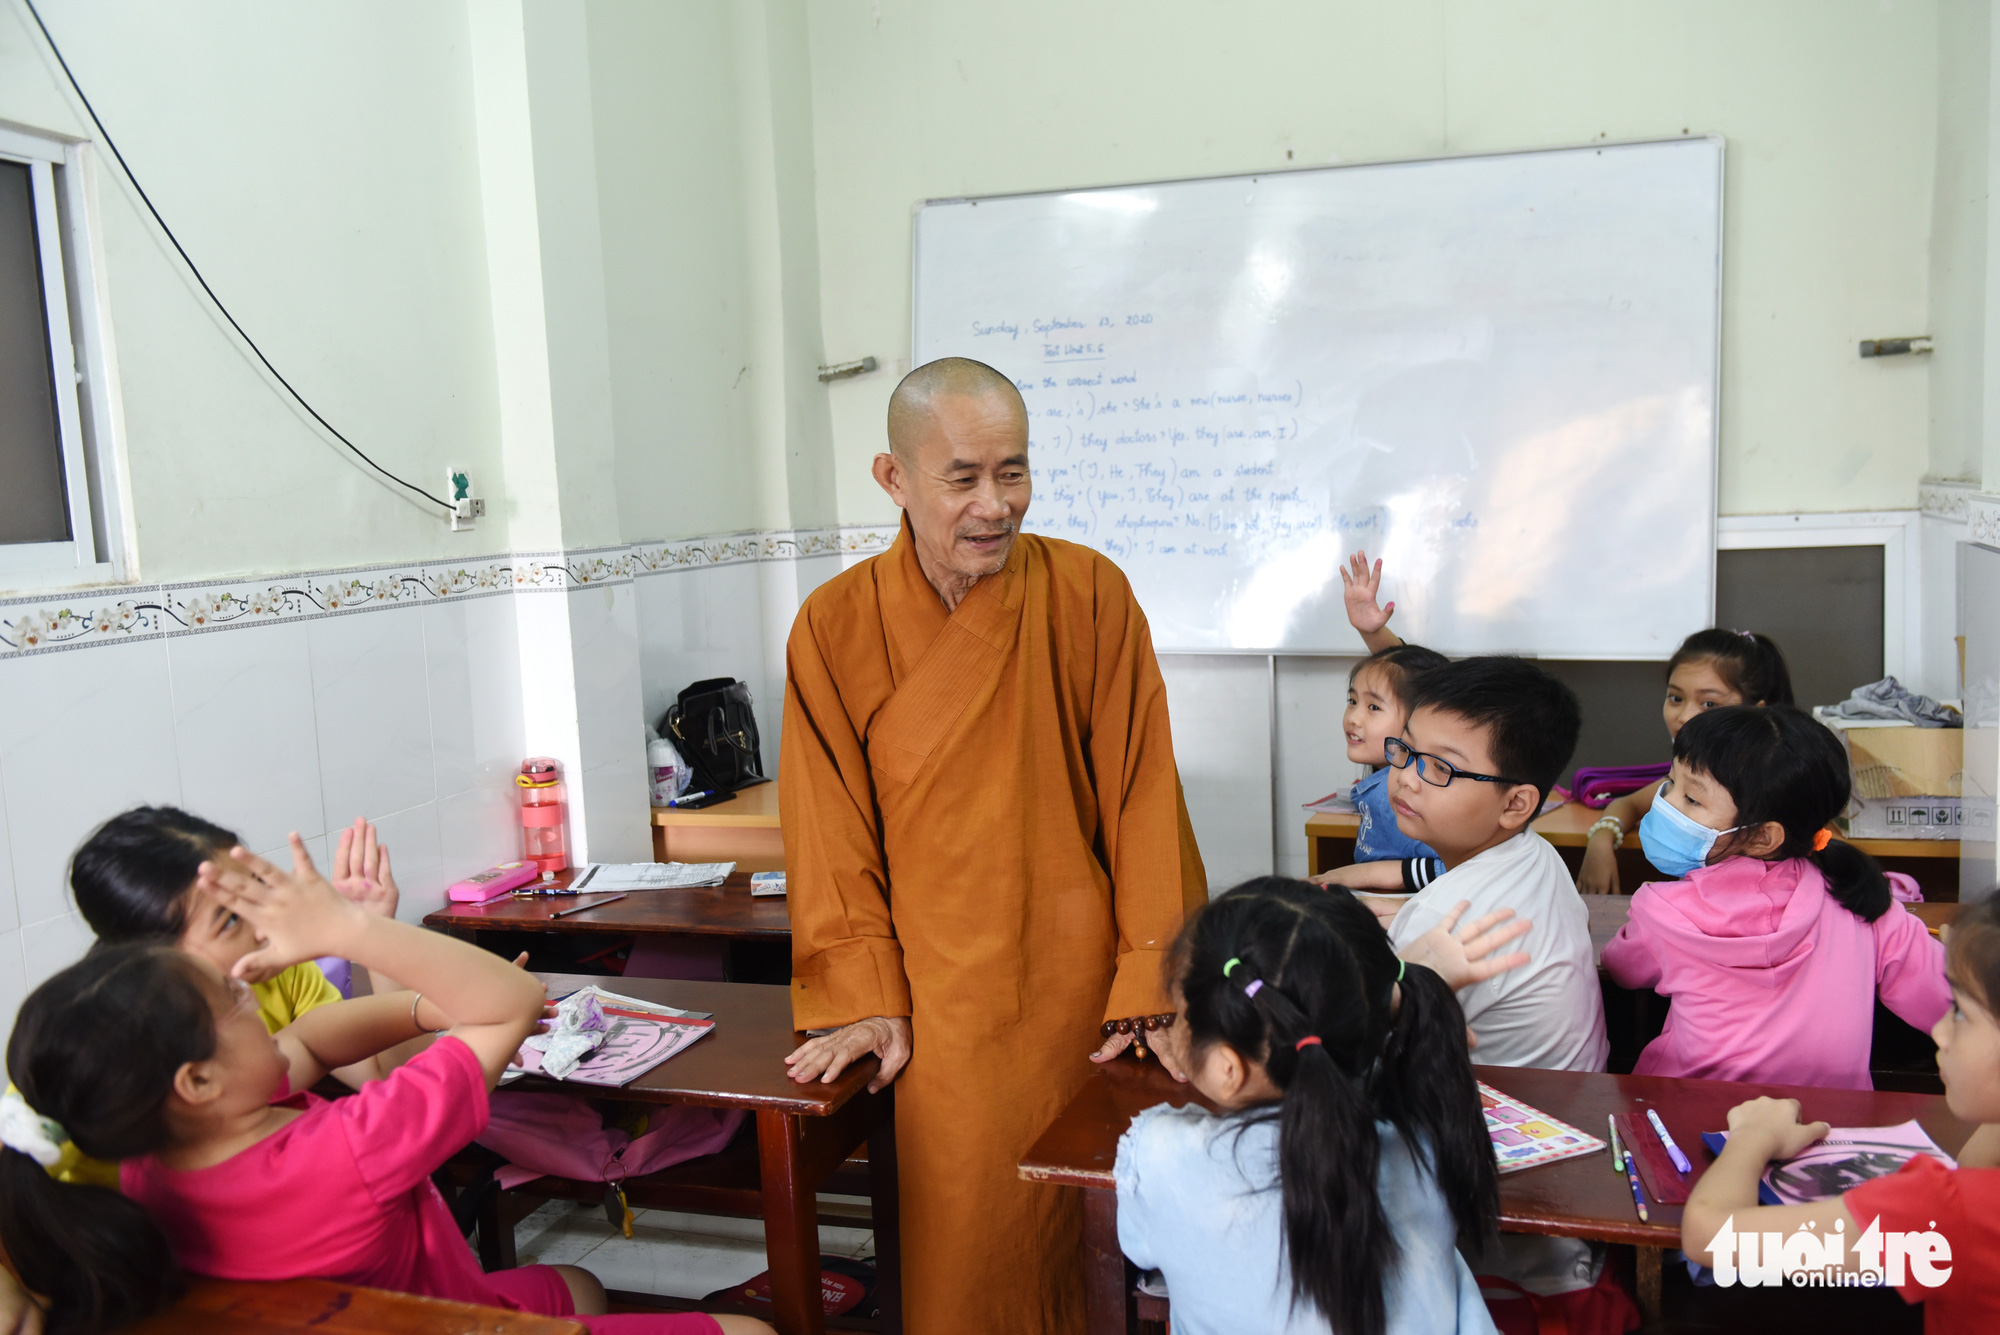 Pagoda runs gratis language classes in Ho Chi Minh City for over a decade